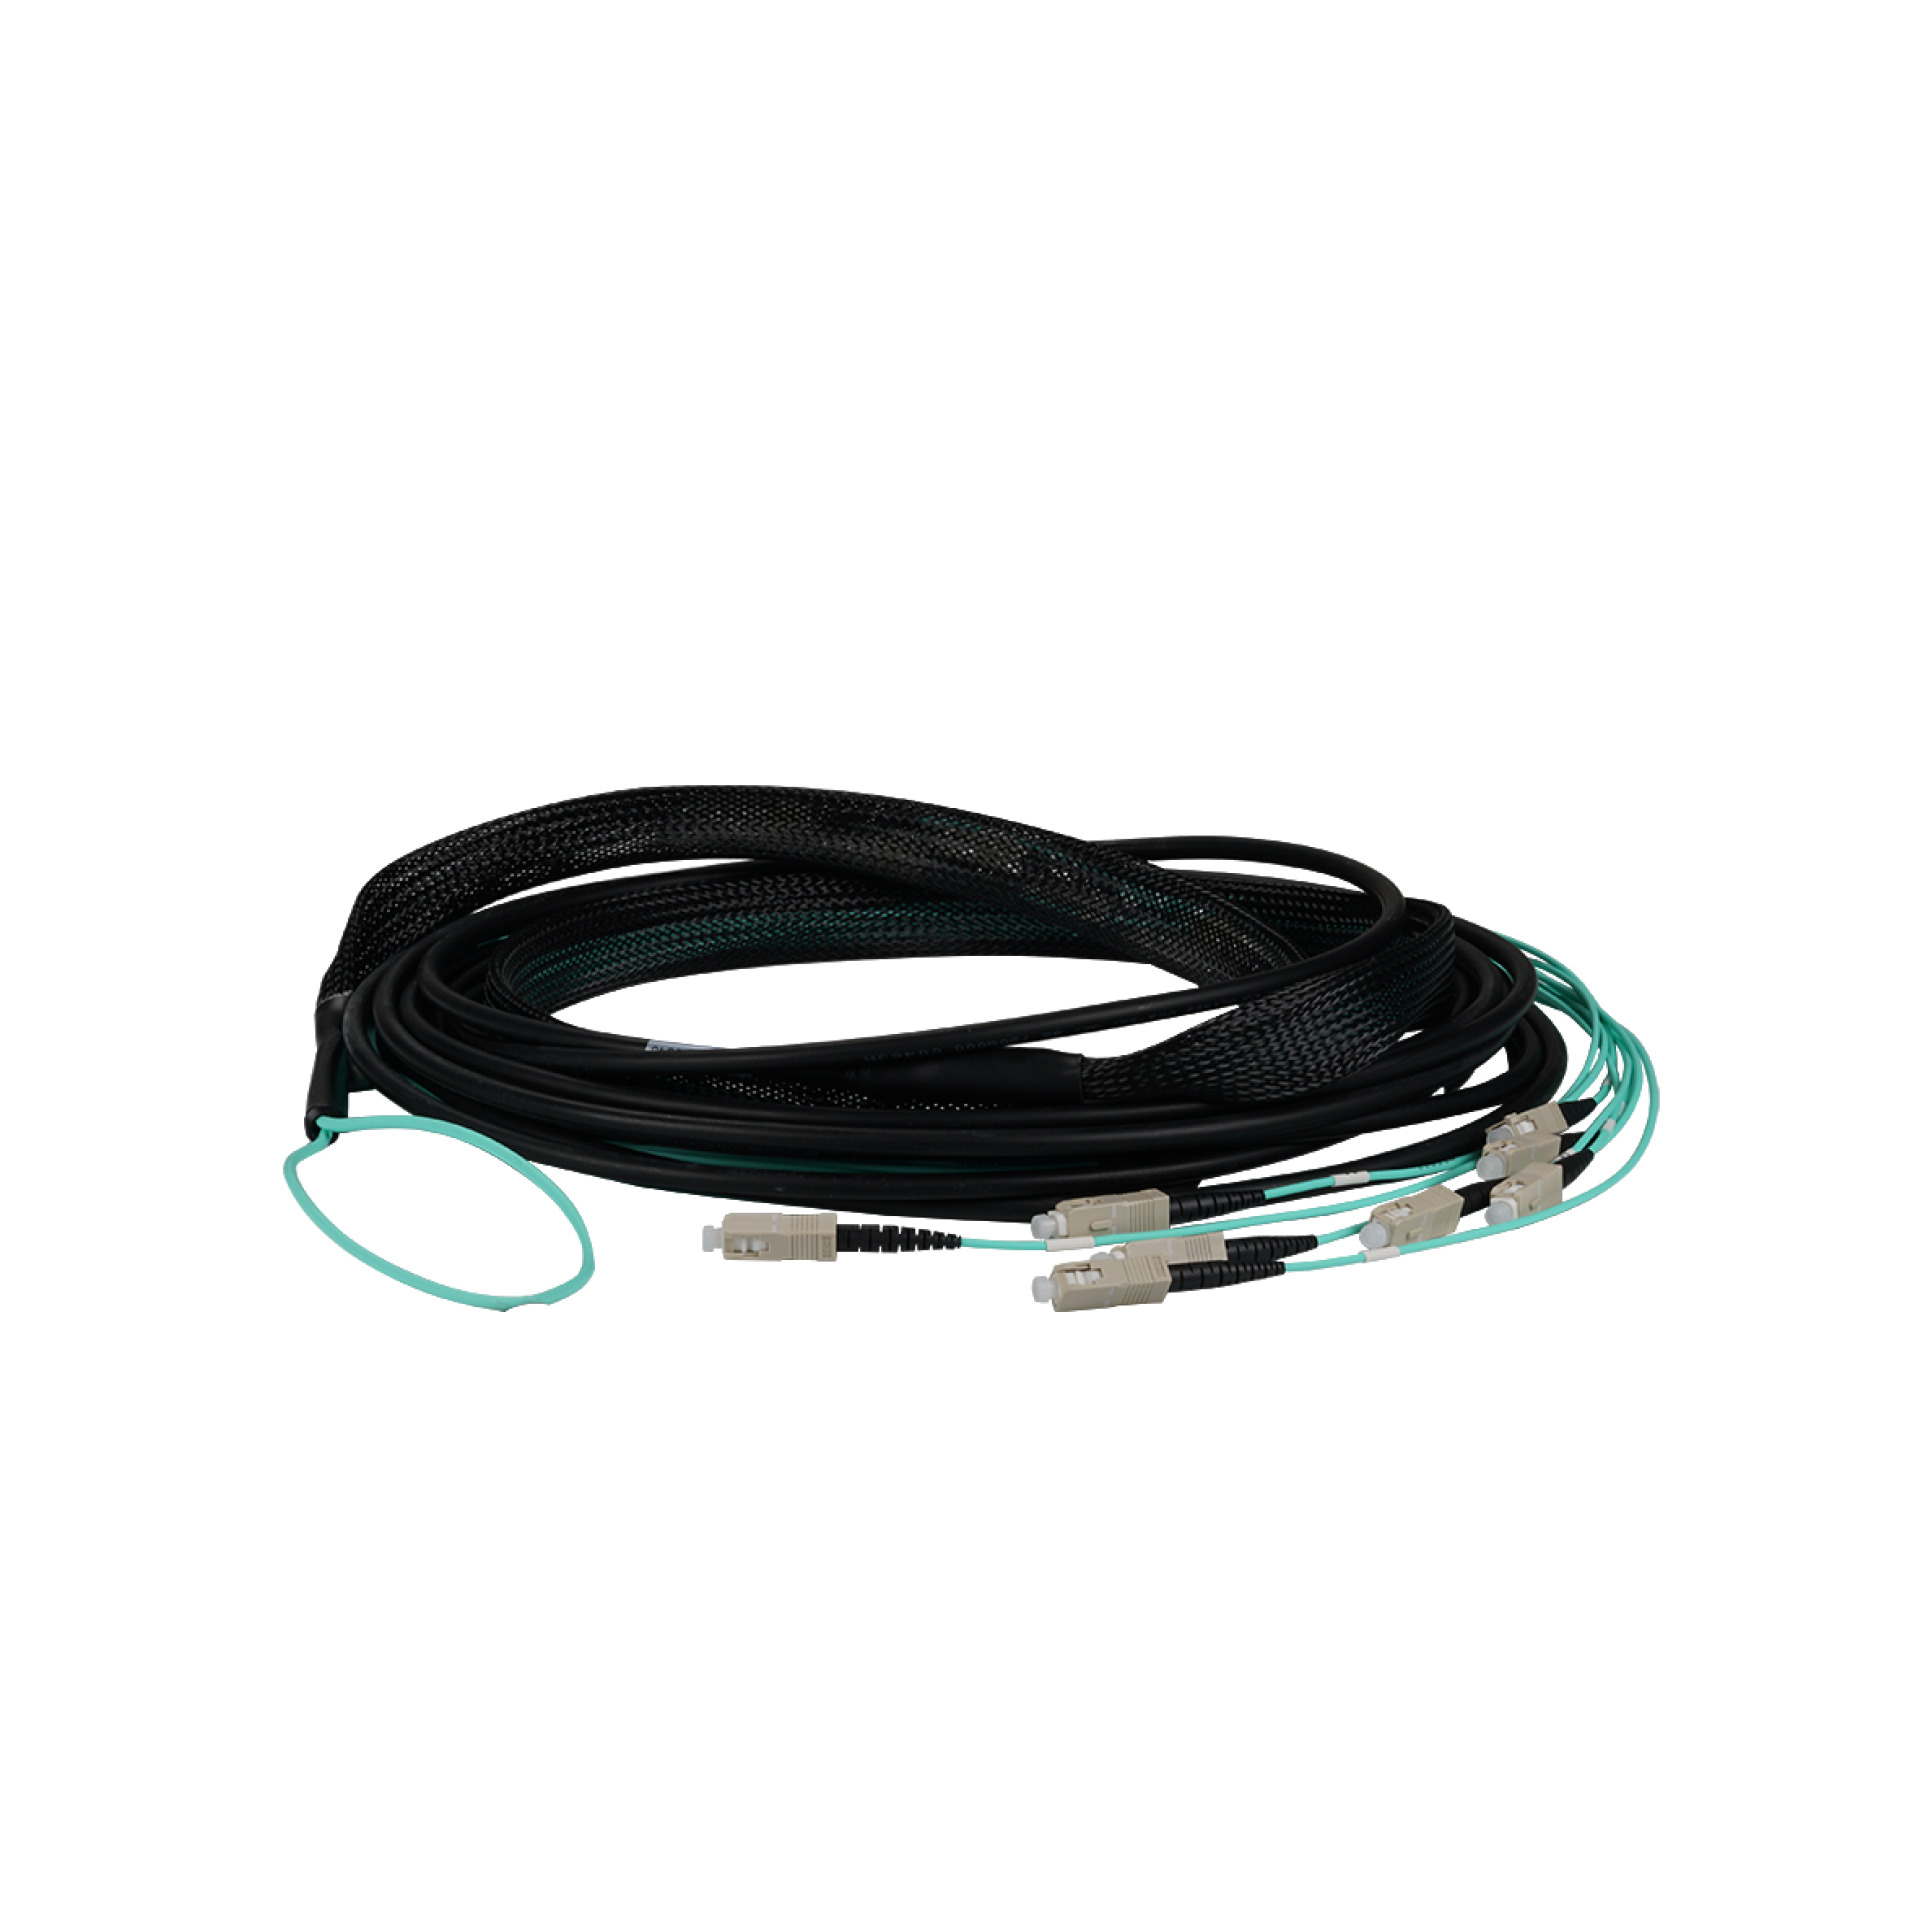 Trunk cable U-DQ(ZN)BH 8G 50/125, SC/SC OM3 190m